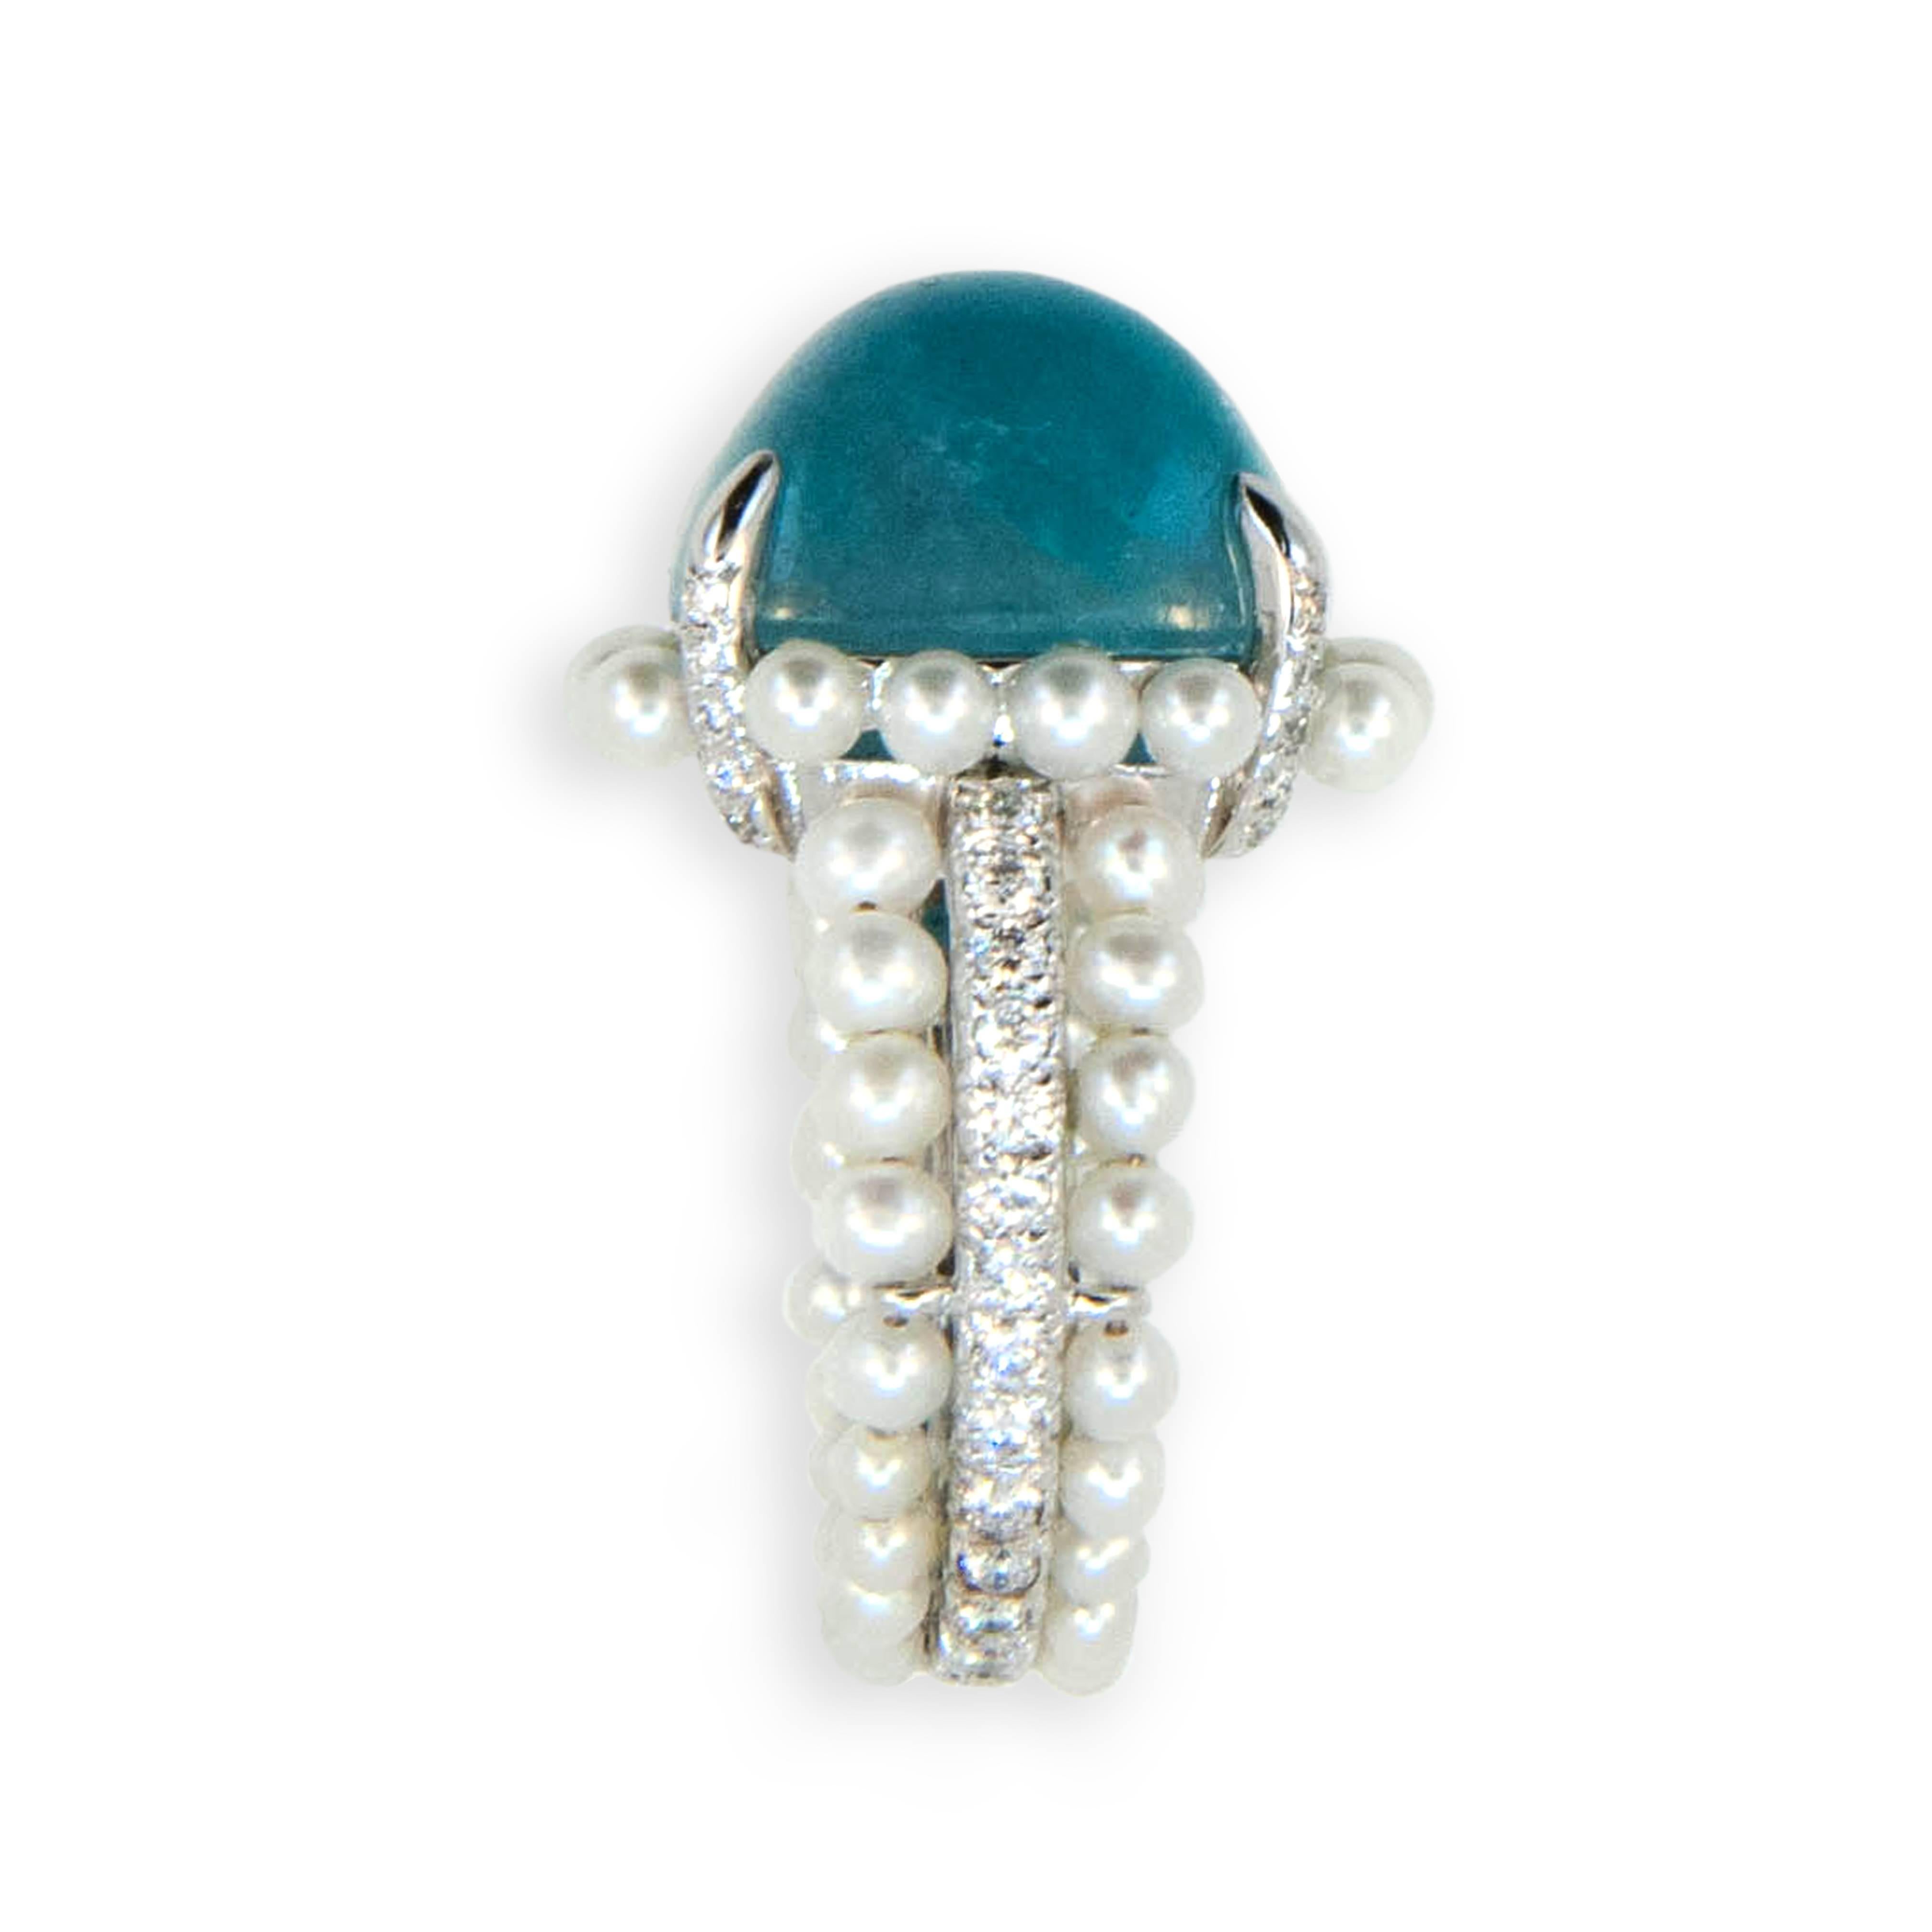 18 karat white gold ring set with one cabochon antique cushion cut Paraiba Tourmaline 11.99 carats (54) cultured Pearls are set surrounding Paraiba at base and in two outer rows of shank (51) round Diamonds are set on four prongs and in center row